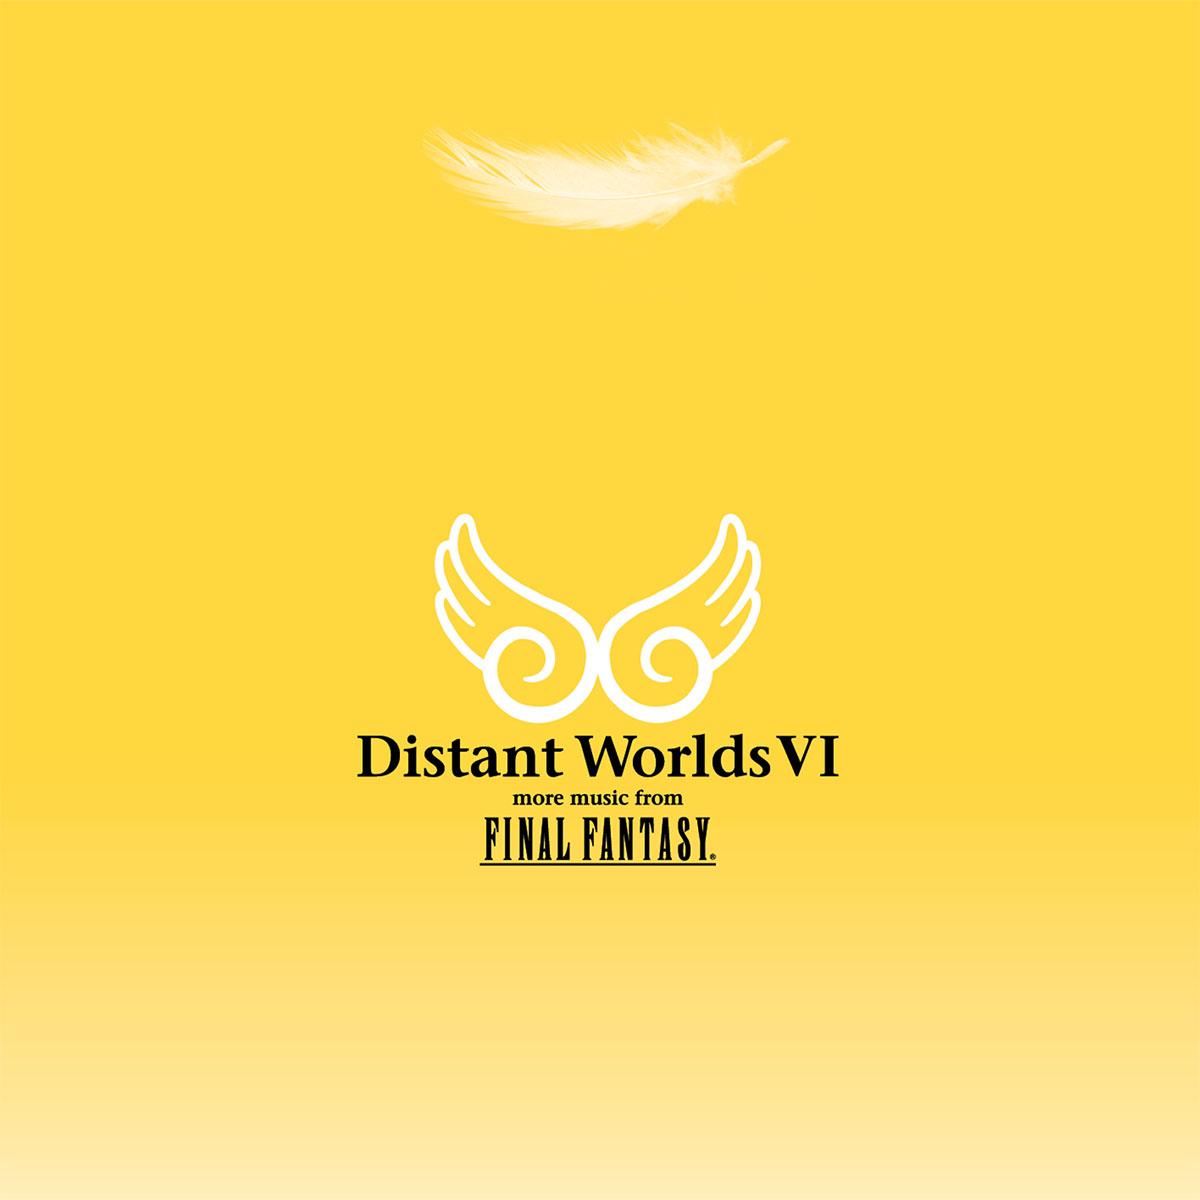 Distant Worlds VI: more music from Final Fantasy